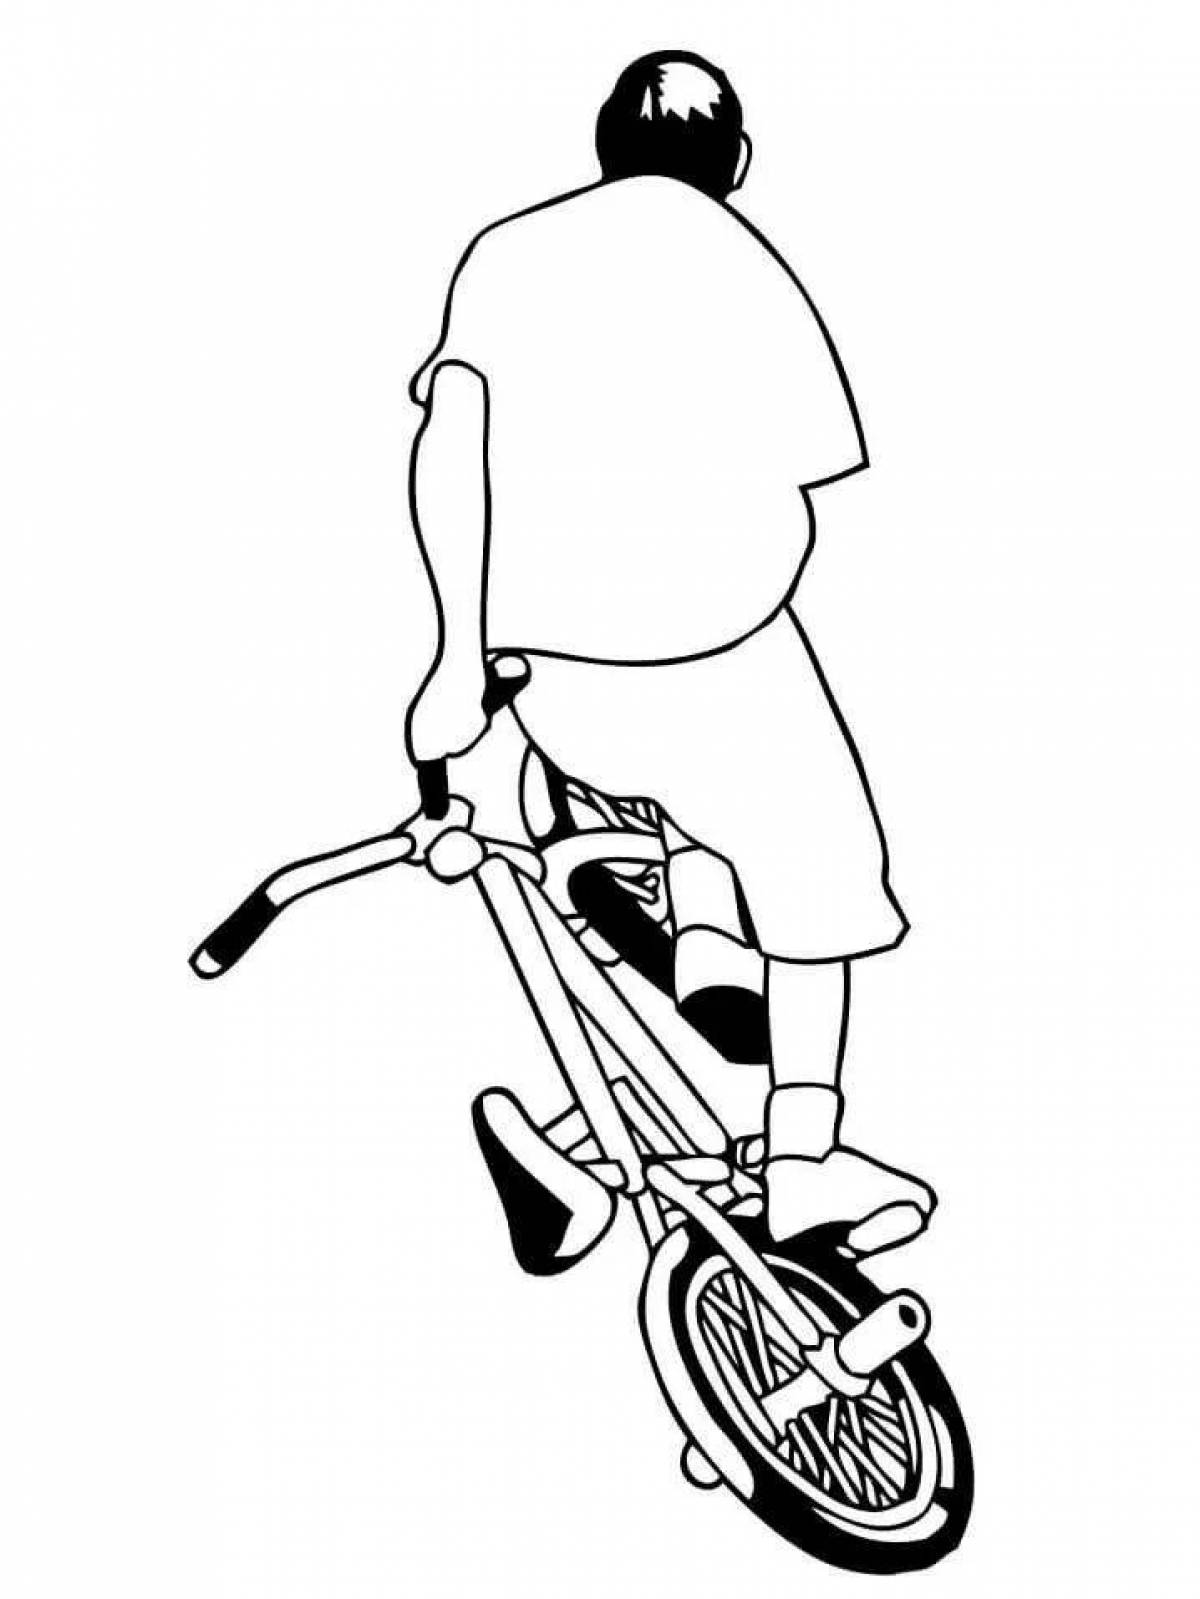 Coloring page glowing stunt scooter